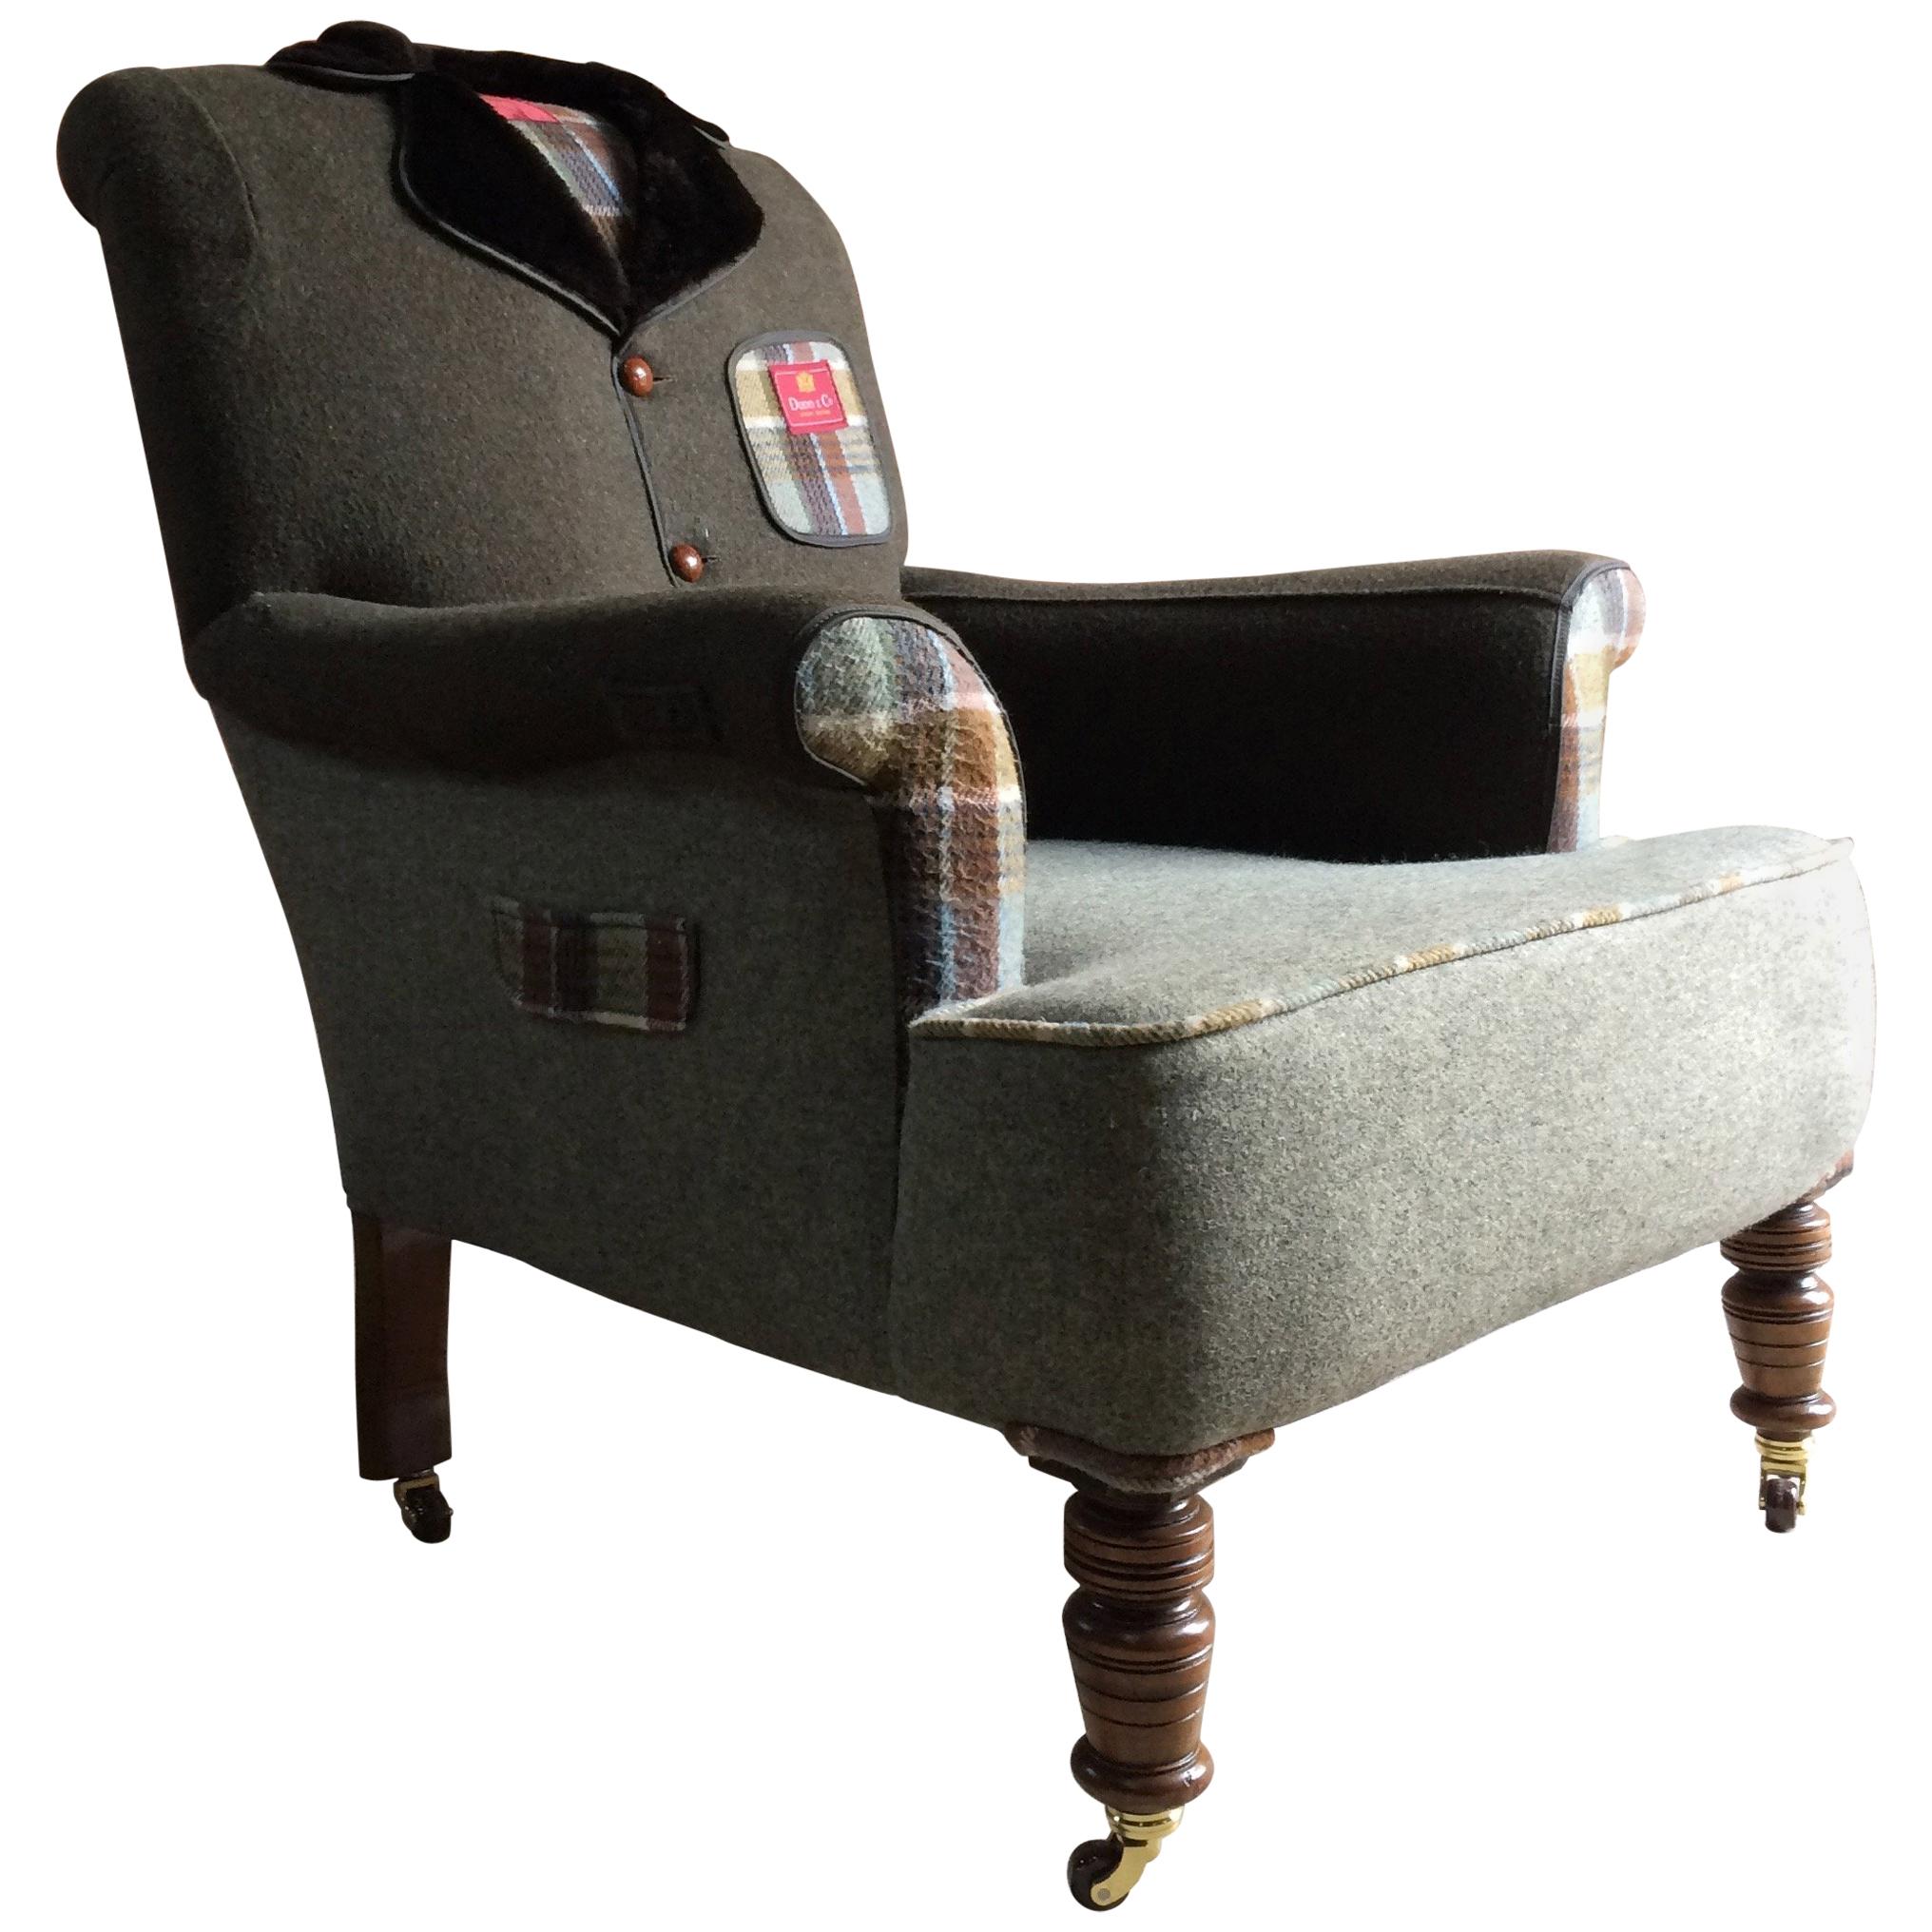 Antique Armchair the Country Tweed Armchair Bespoke Tailor Made Unique Victorian